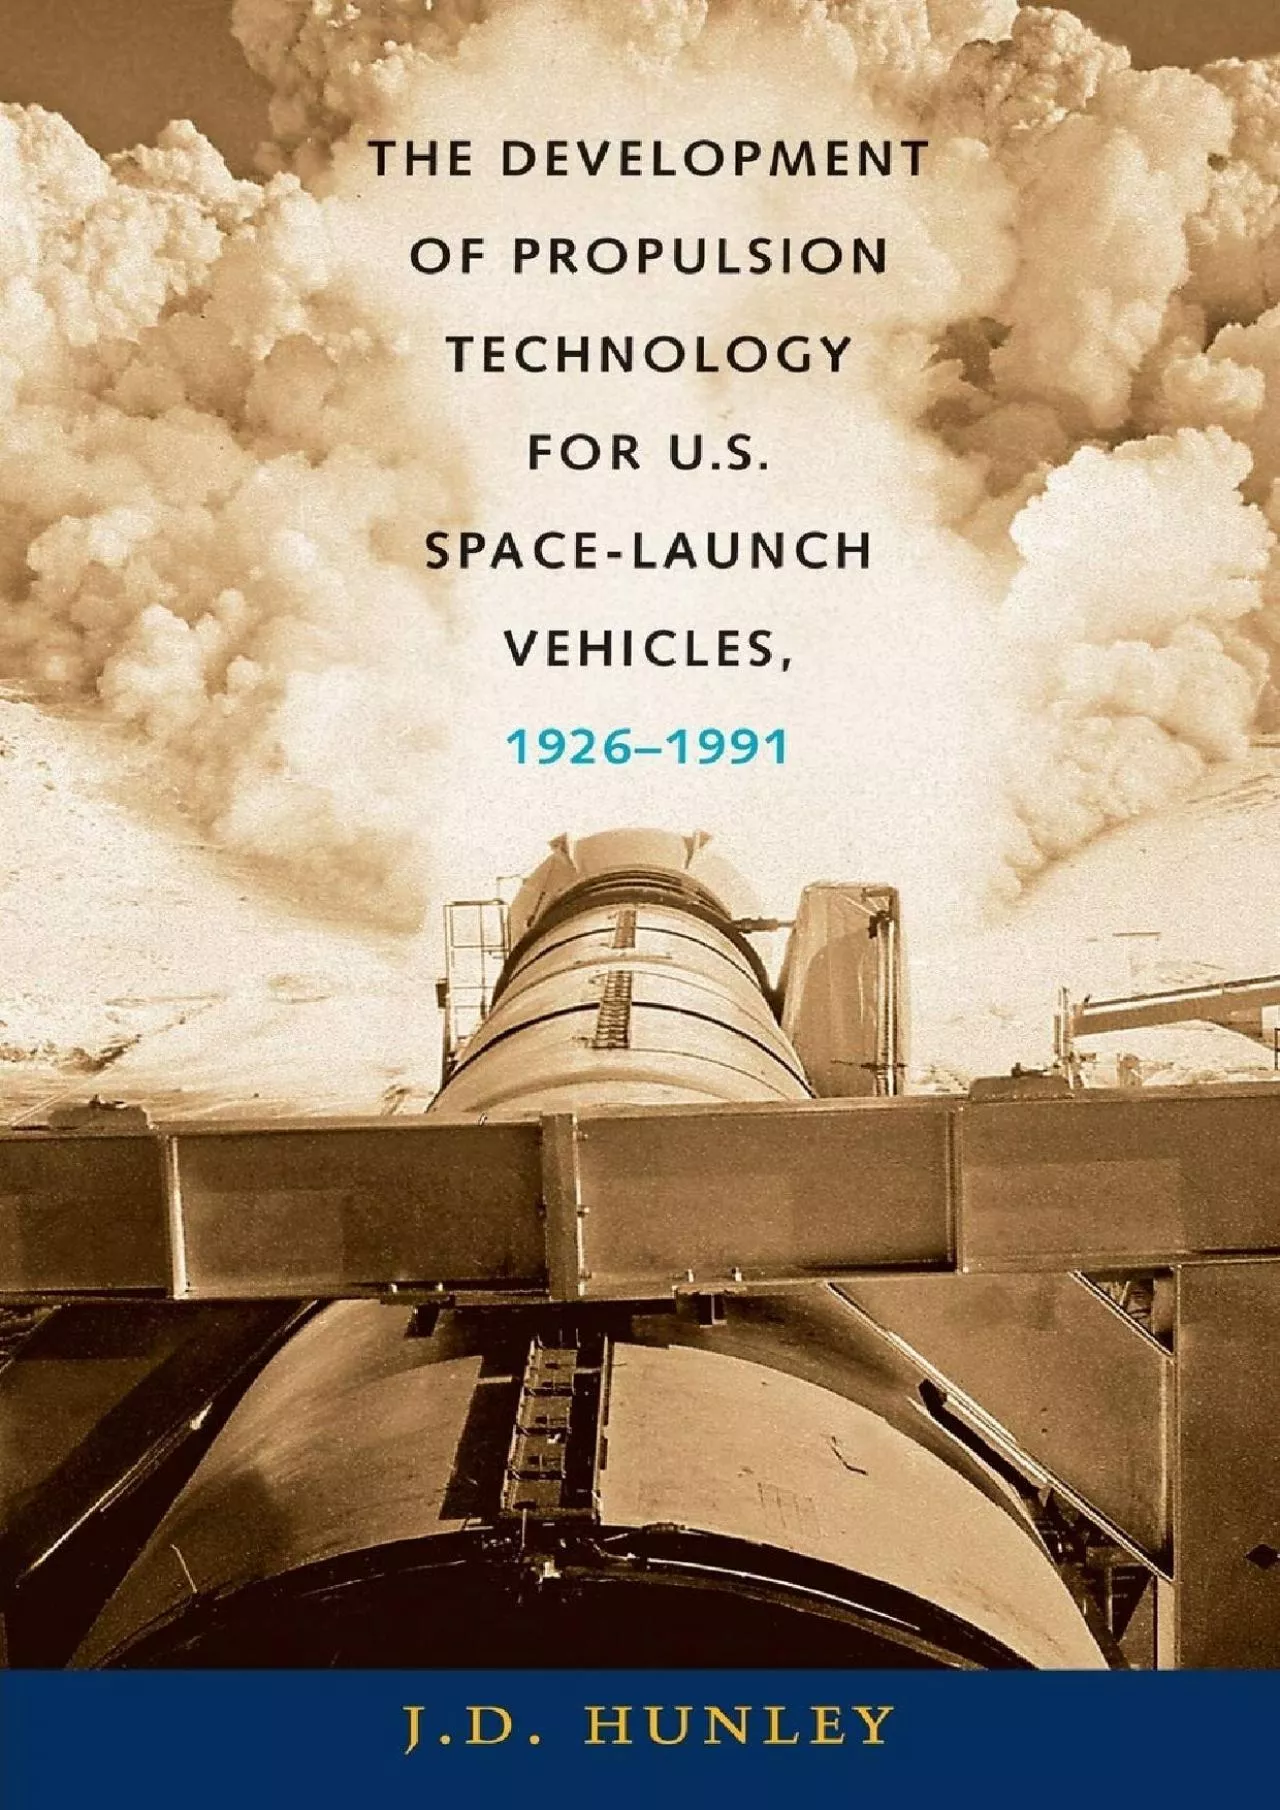 (BOOS)-The Development of Propulsion Technology for U.S. Space-Launch Vehicles, 1926-1991